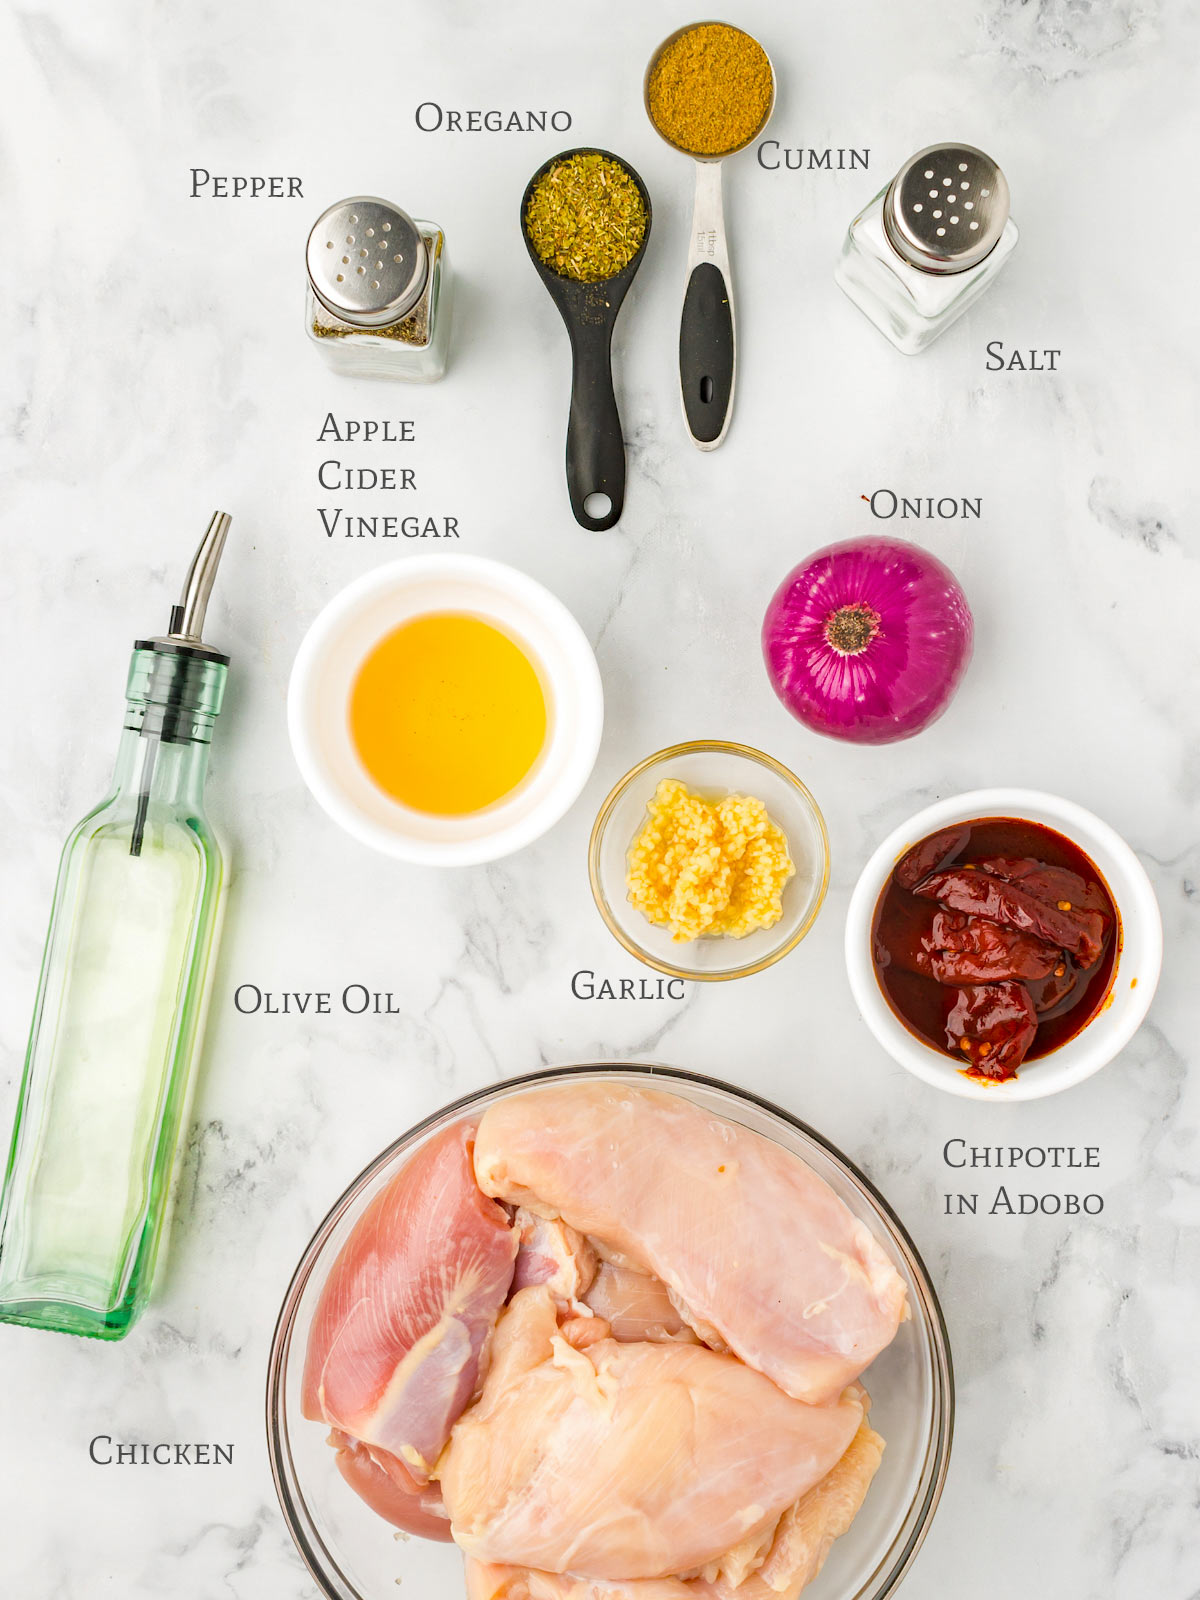 All of the ingredients for Copycat Chipotle chicken.